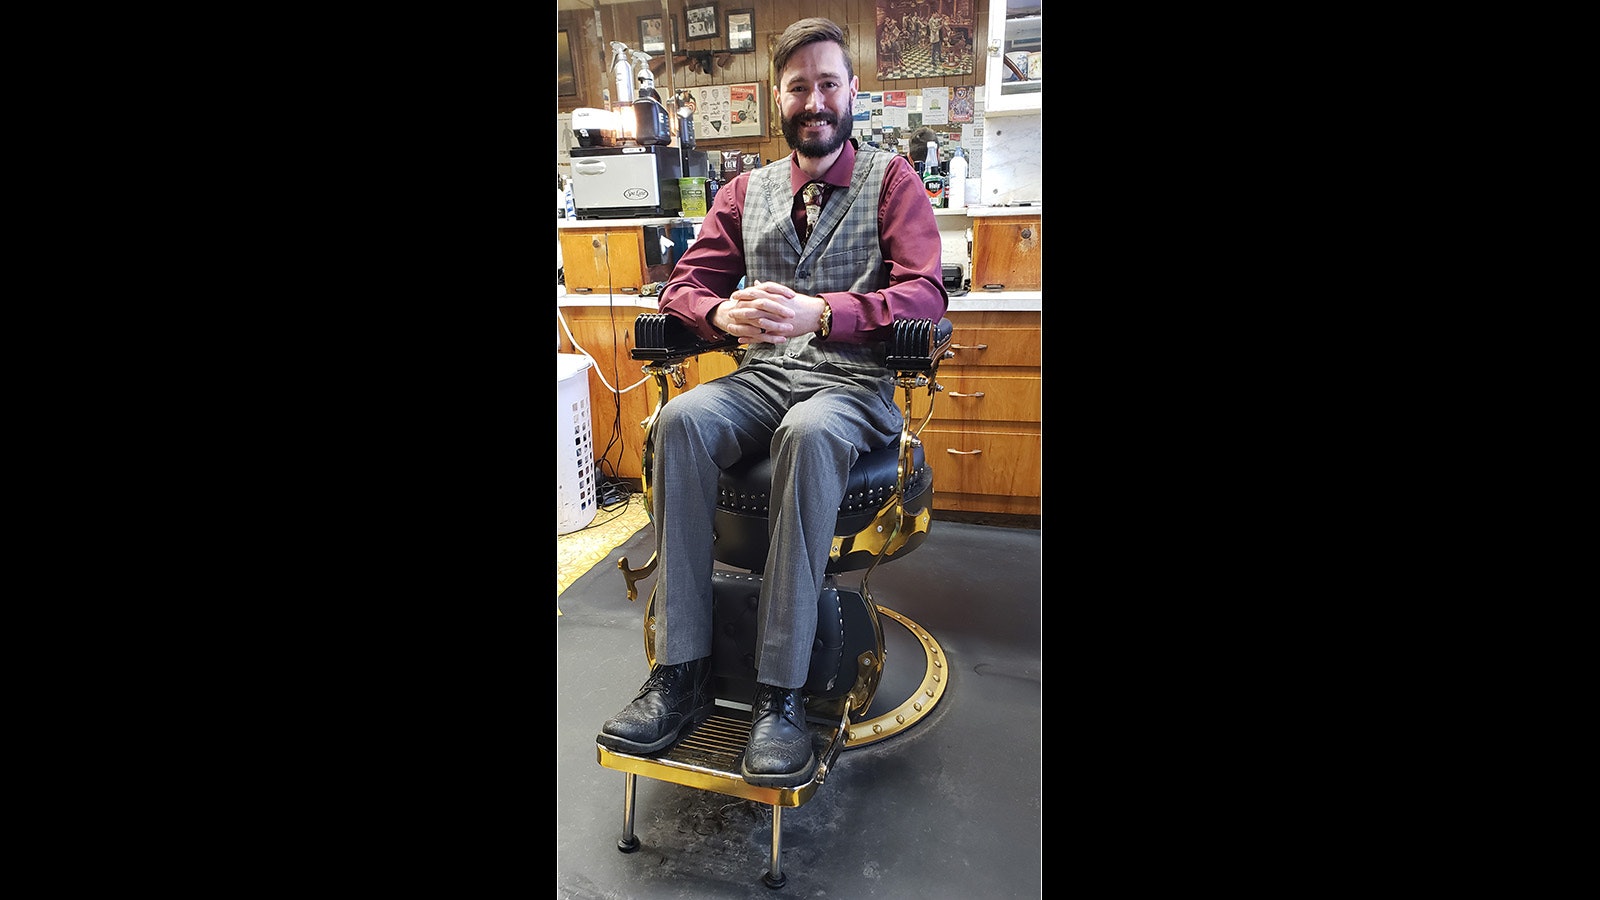 Kurt Matthew Wheeler continues a tradition of old-time barbering in Lovell, Wyoming.